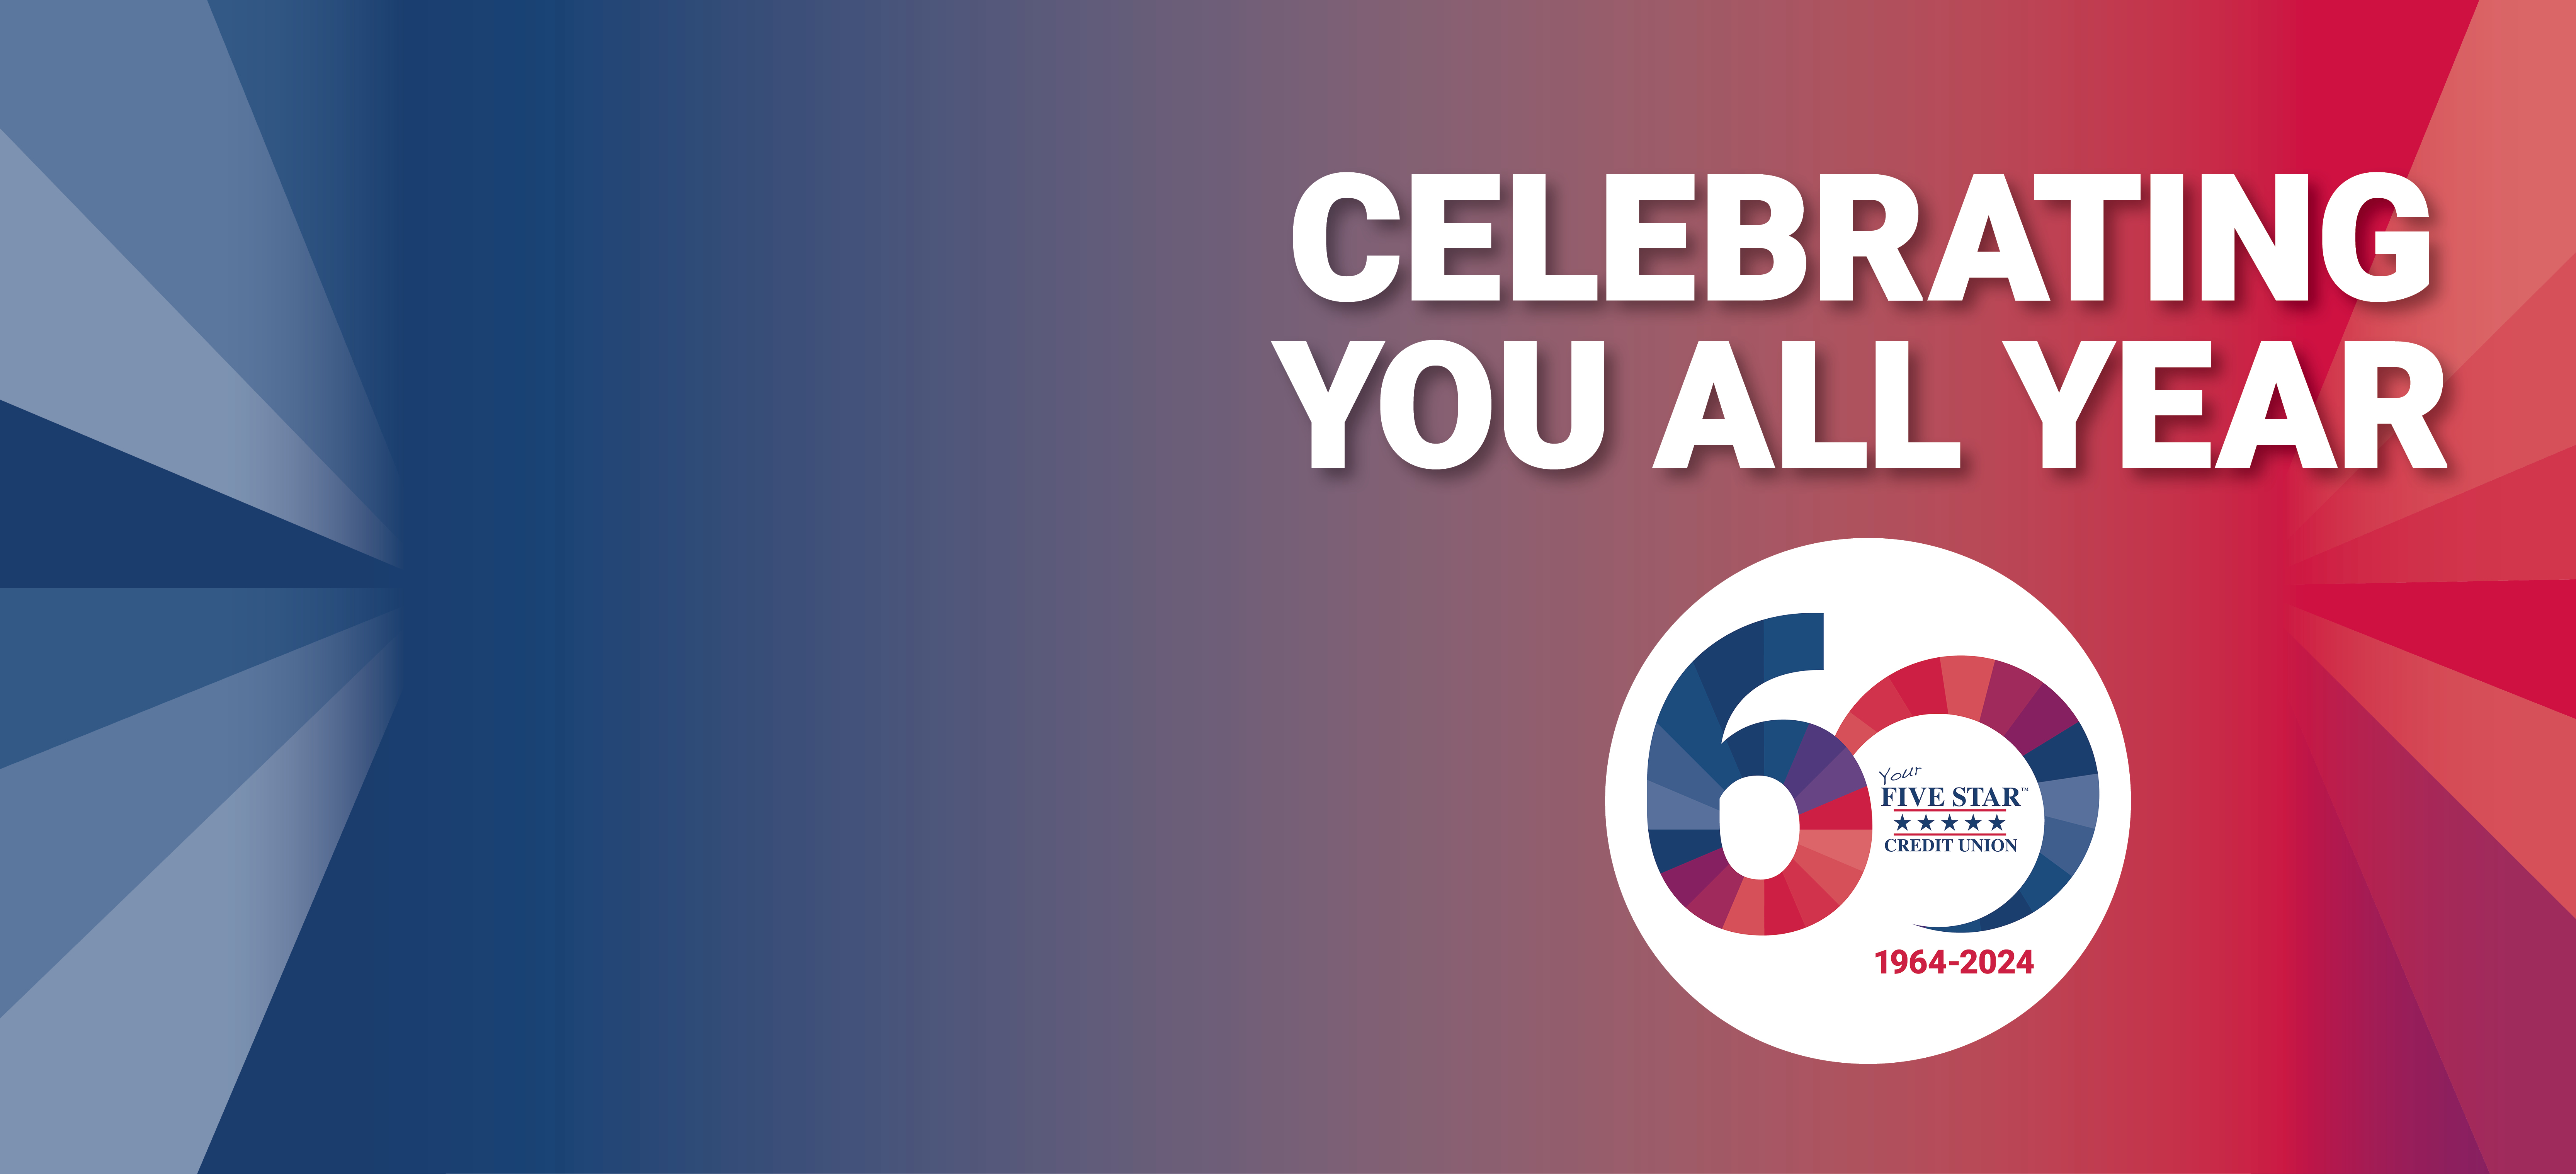 60th anniversary logo celebrating you all year. 